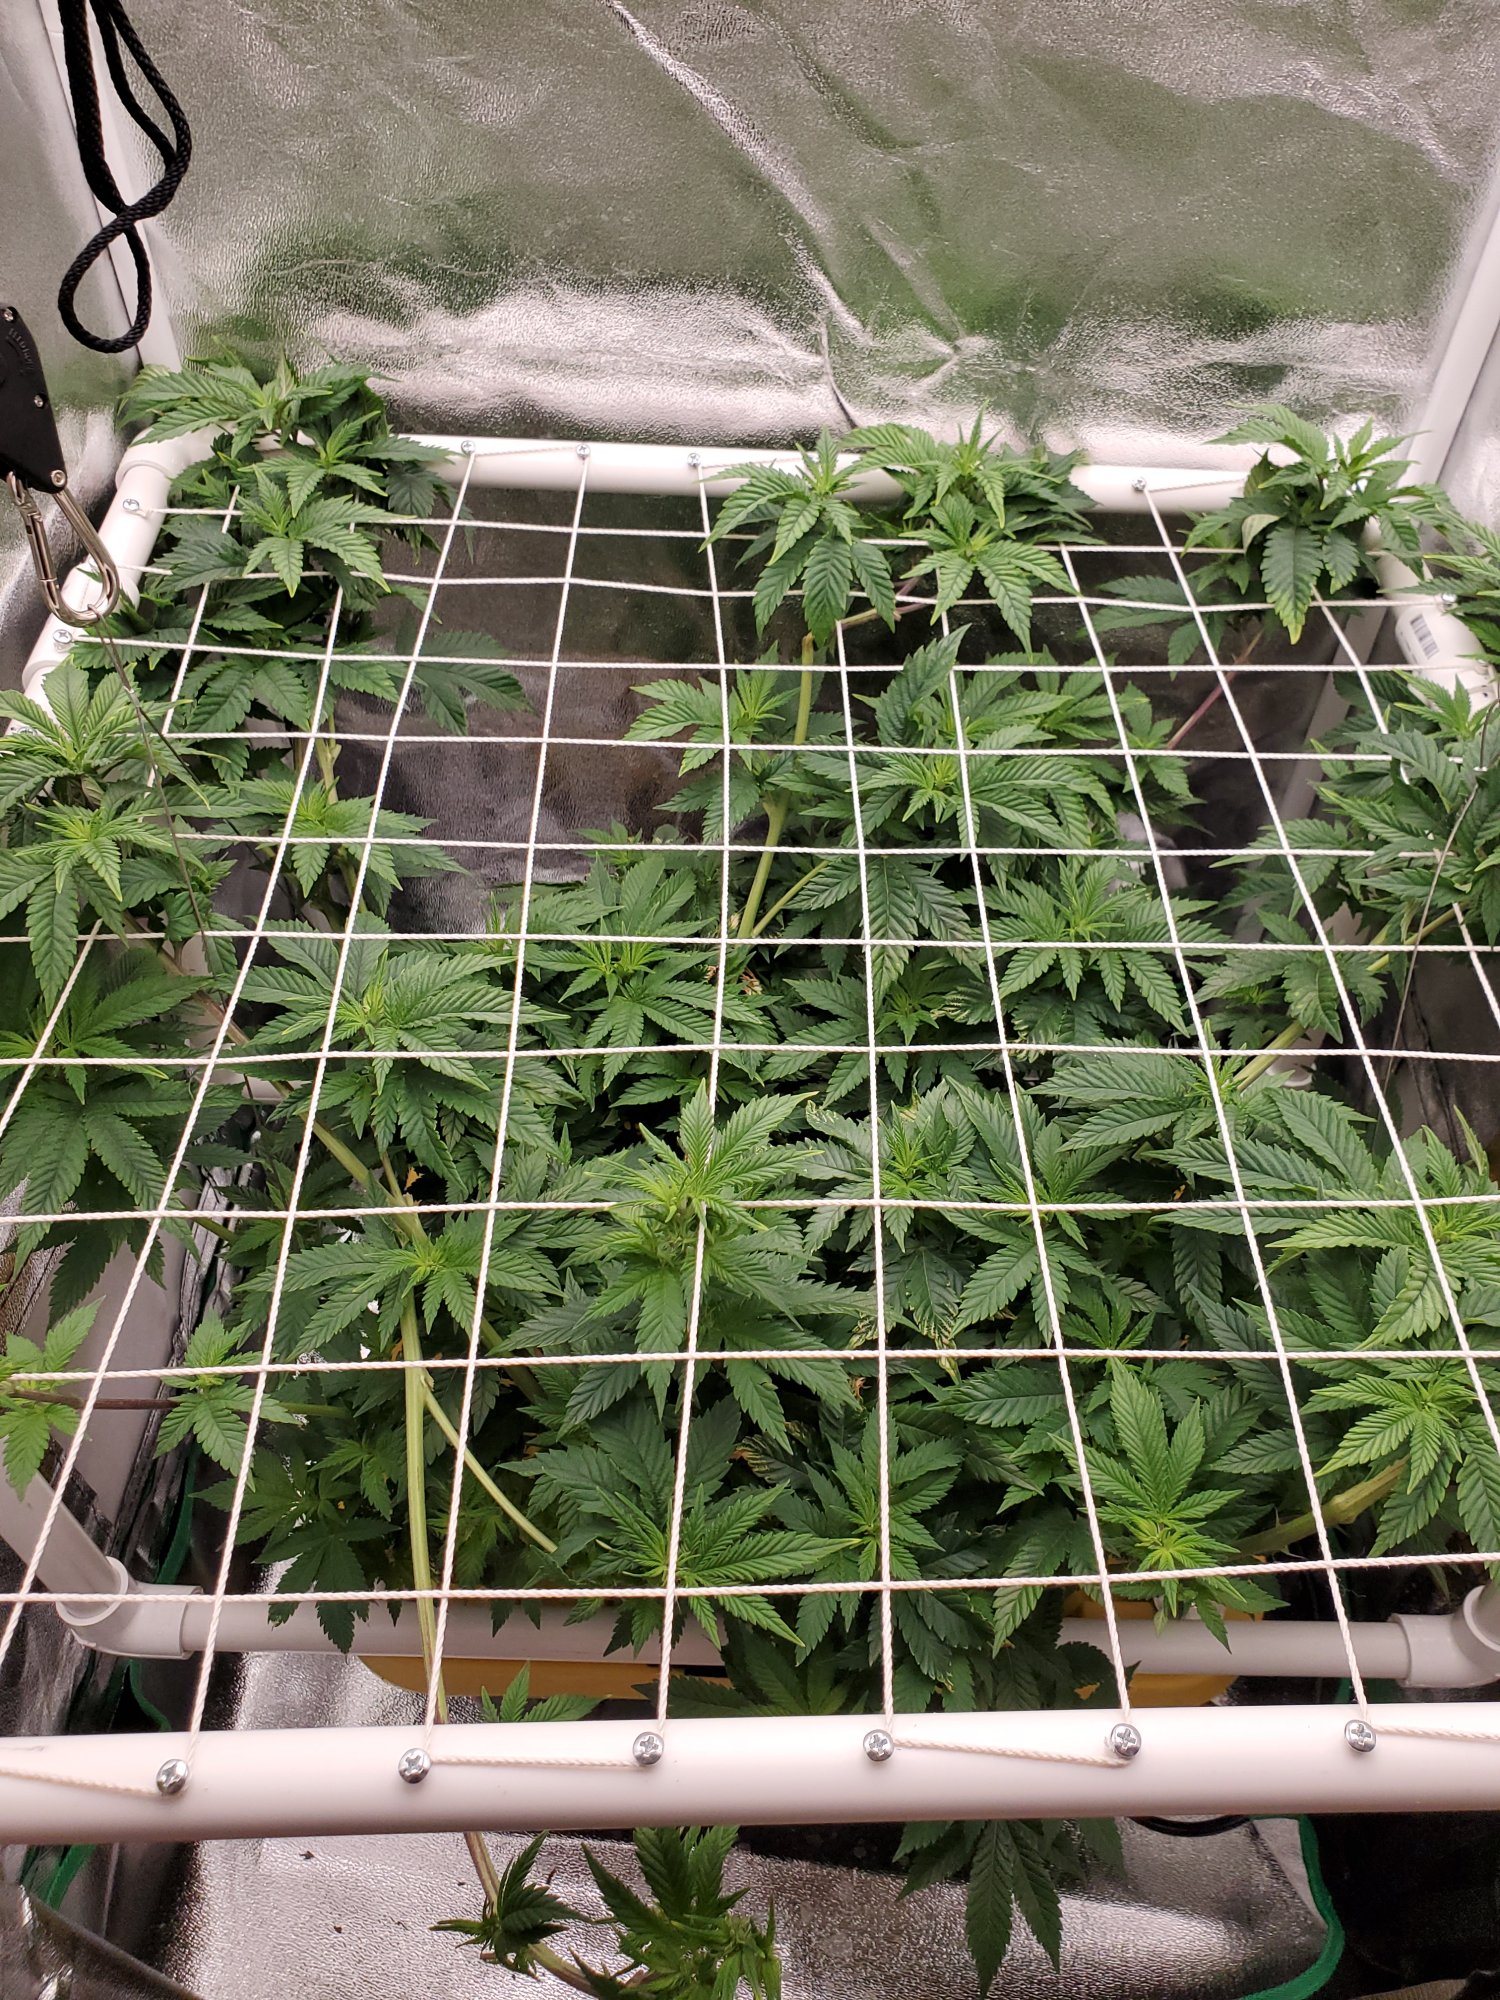 Round 2 clones for funzies going to strip the helloutta this grow 3